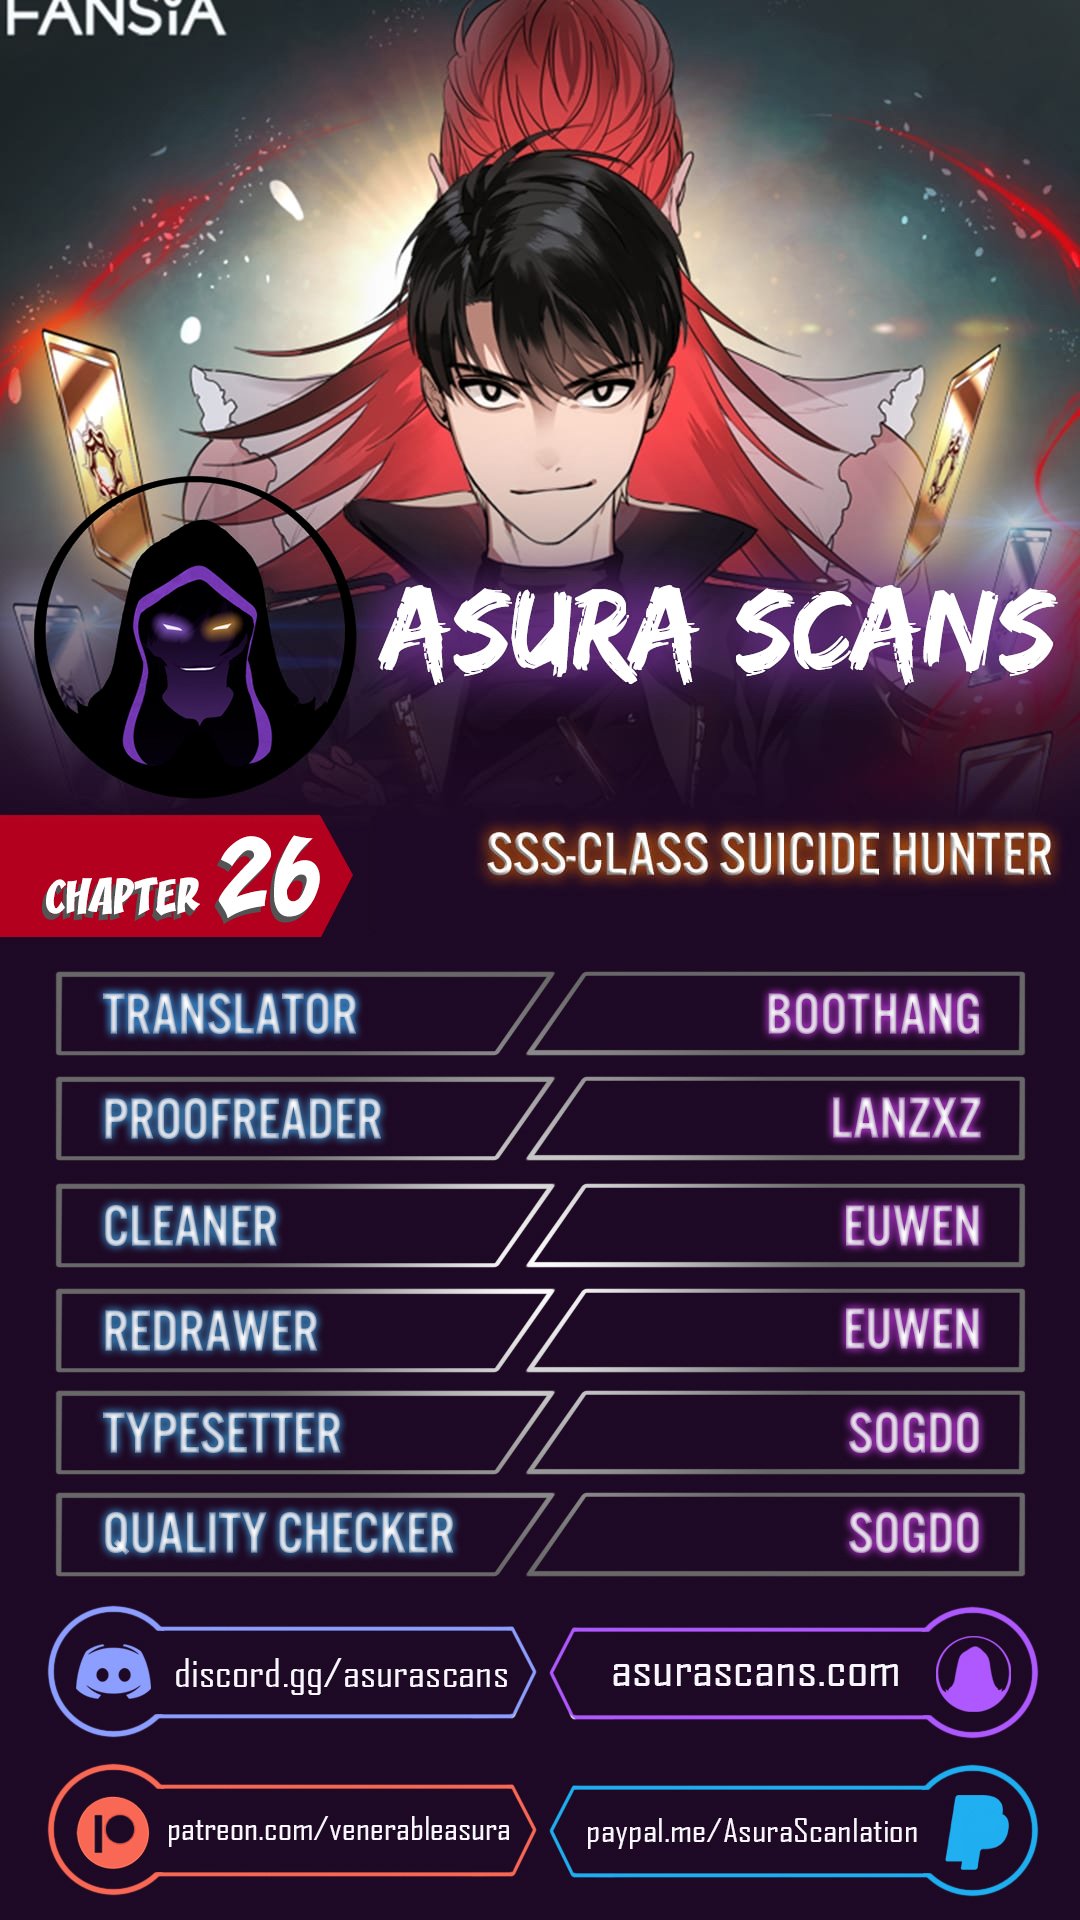 SSS-Class Suicide Hunter chapter 26